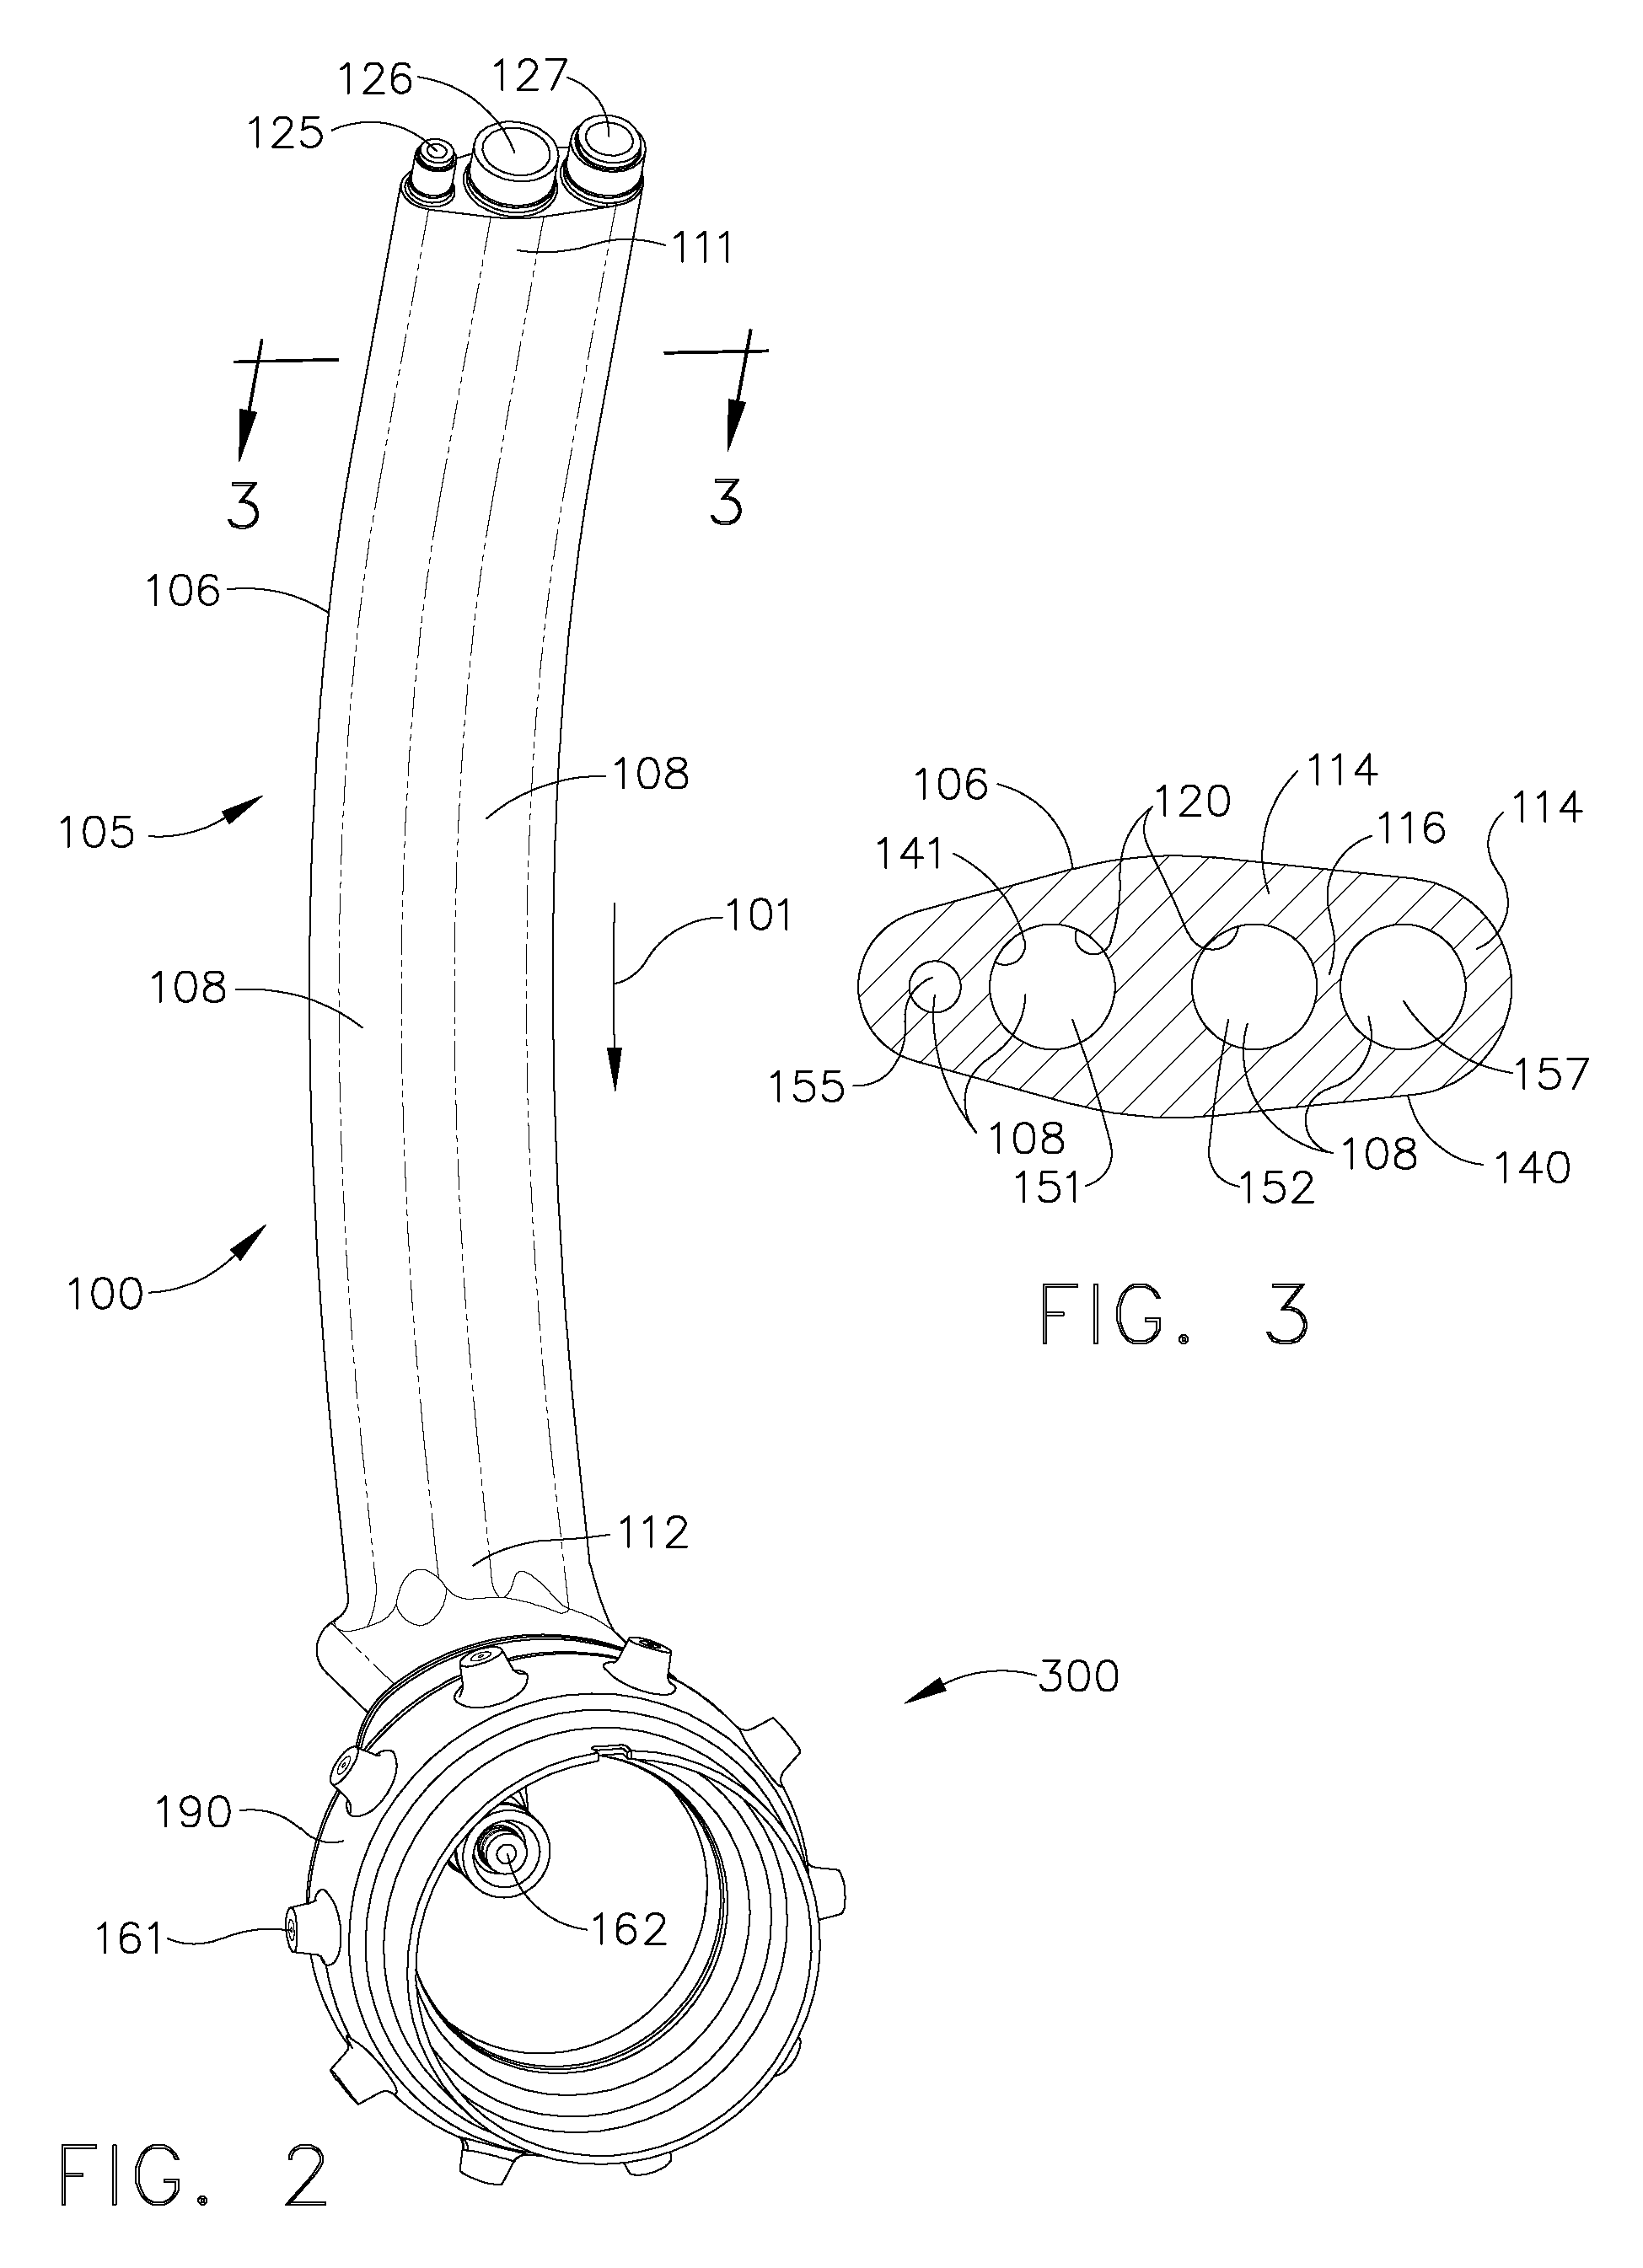 Method of manufacturing a fuel distributor